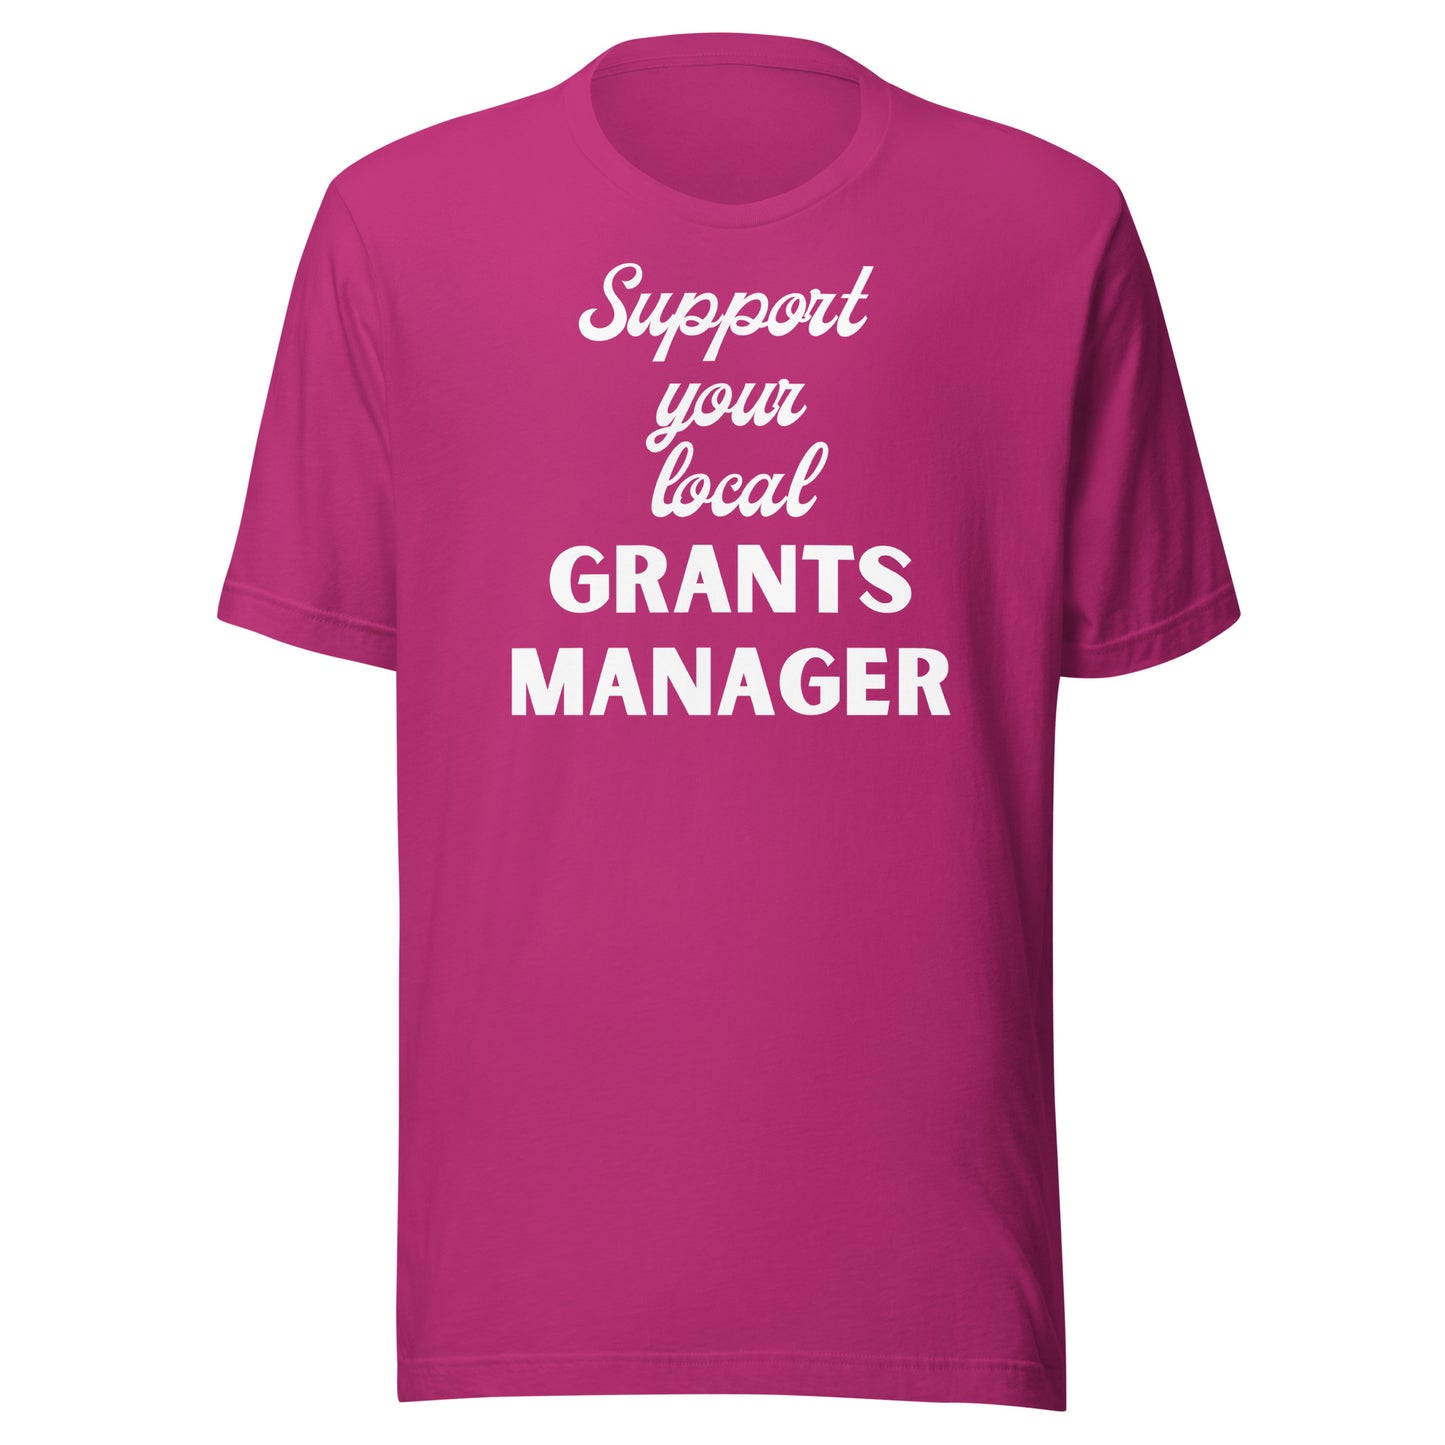 Support Your Local Grants Manager dark Unisex t-shirt